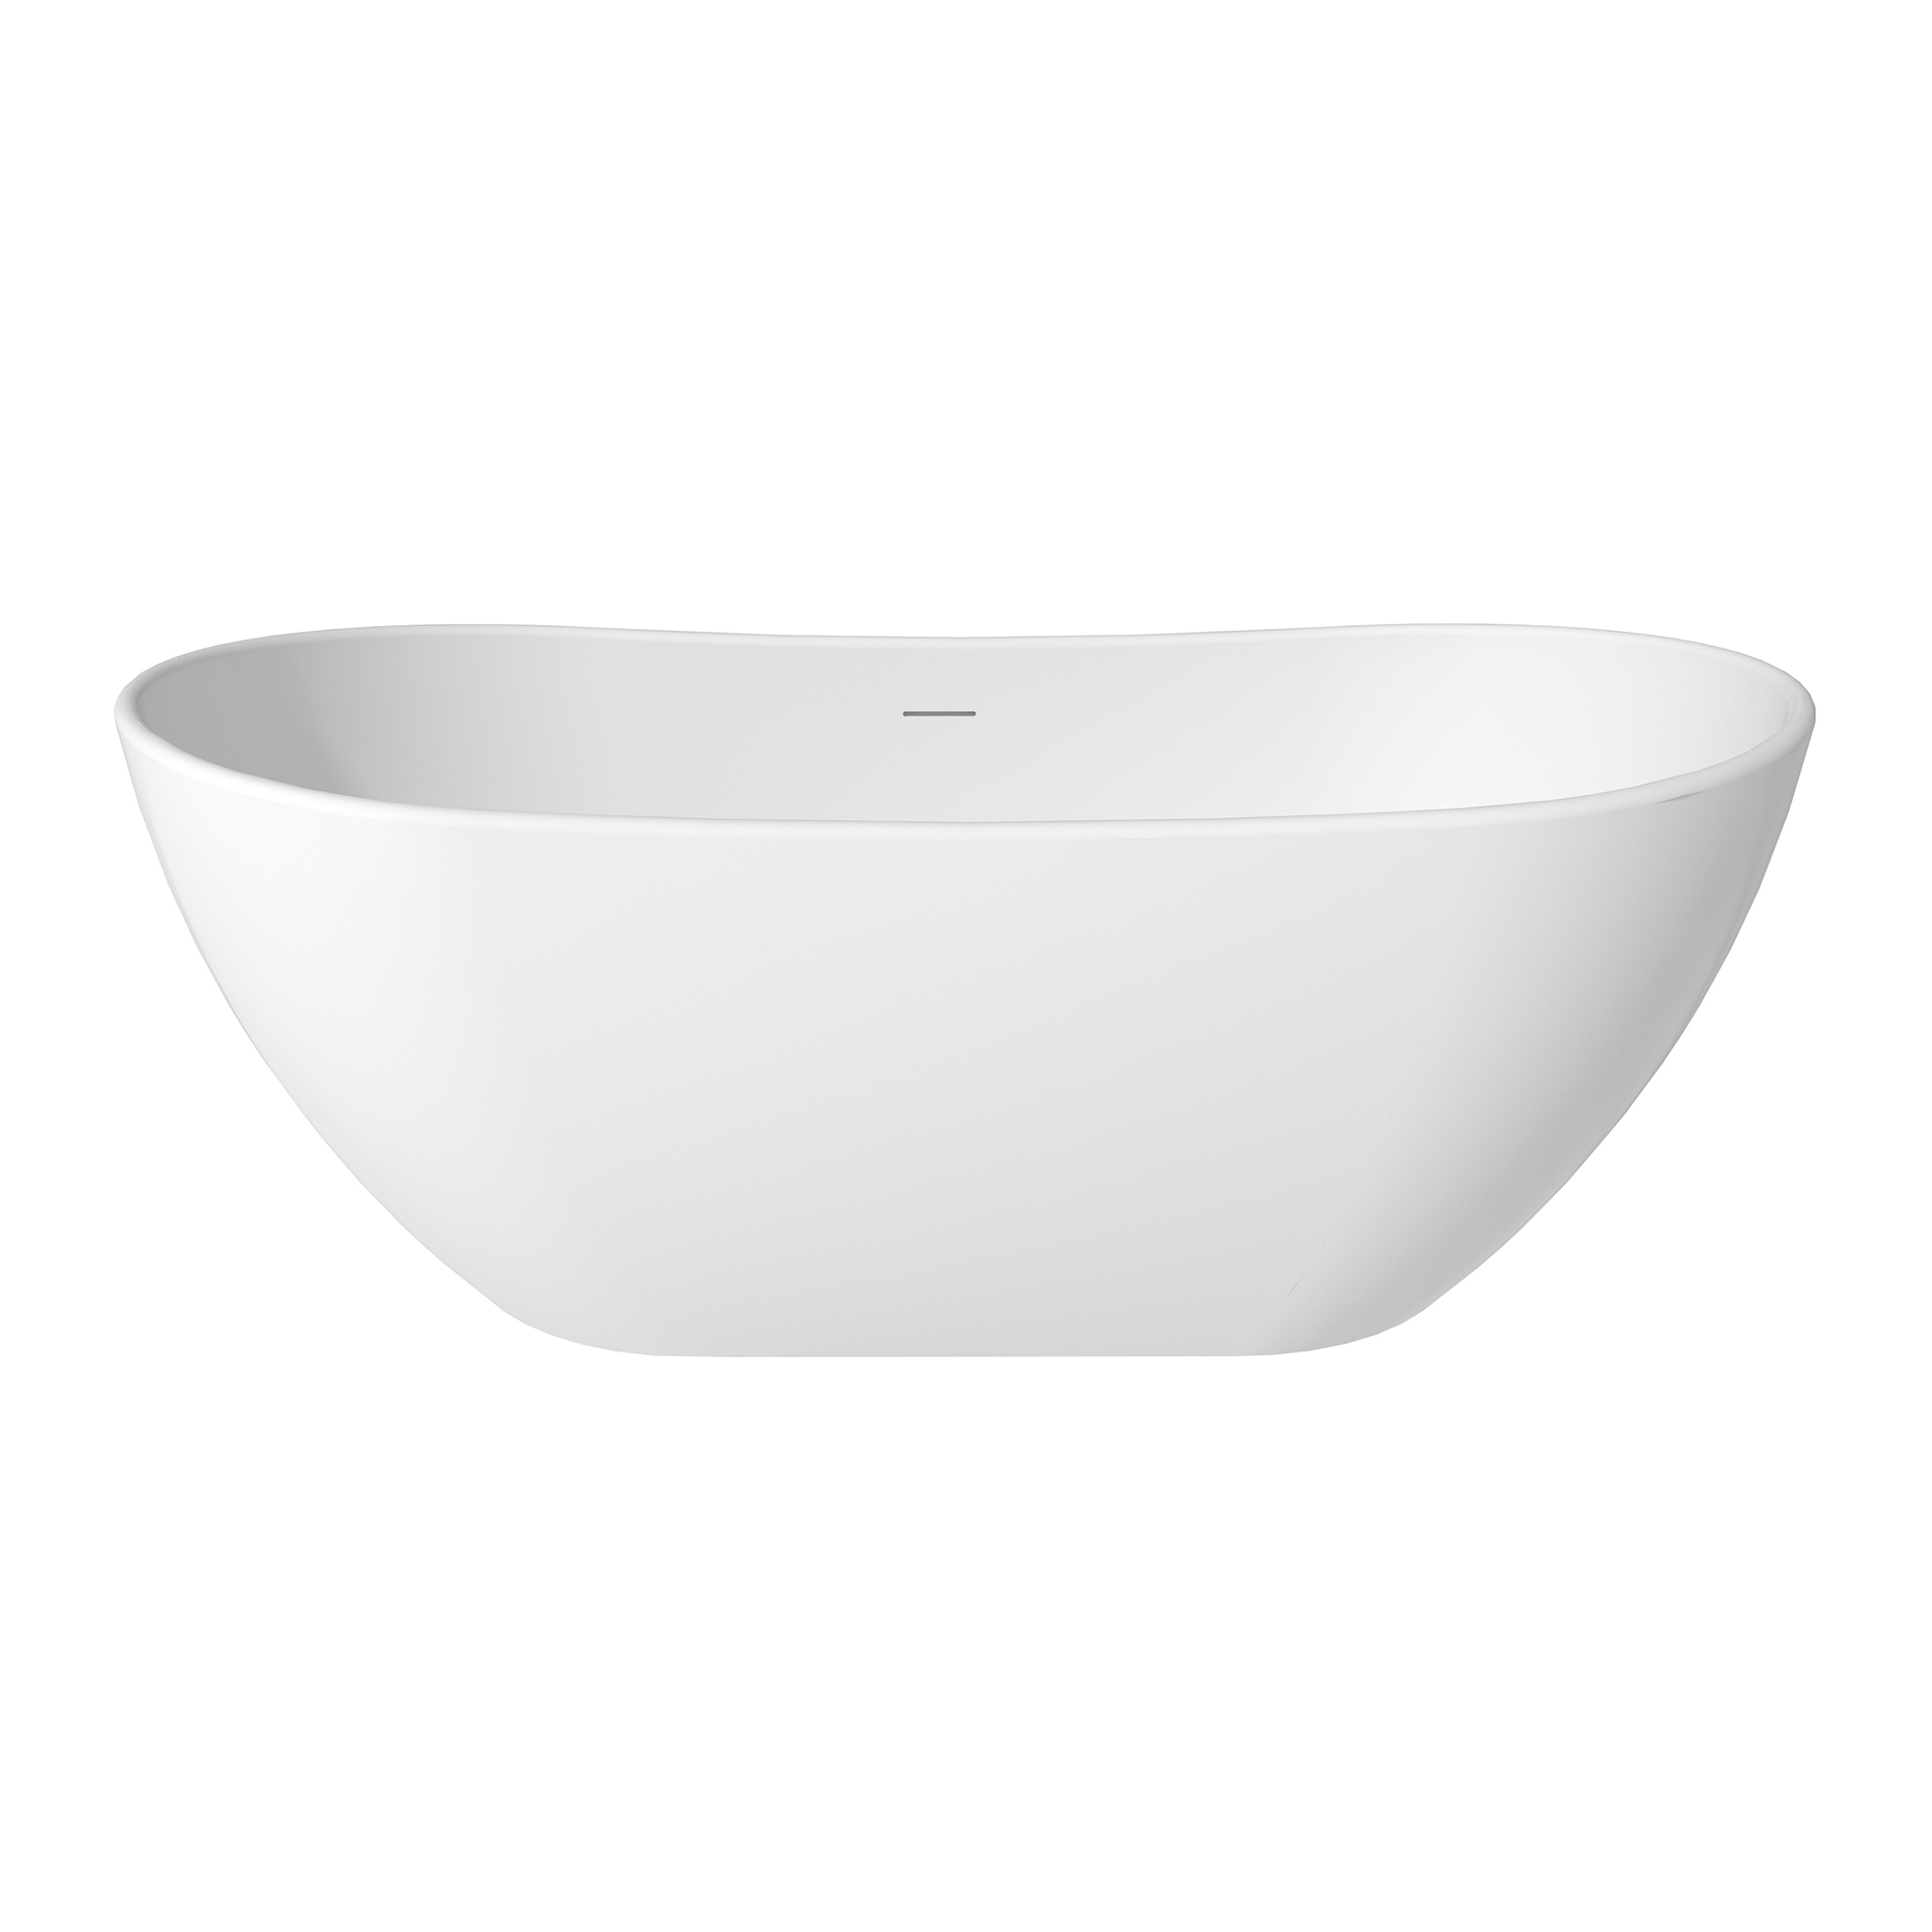 56"/65"/71" Solid Surface Stone Freestanding Tub - Soak in Style with Matte White Finish, Center Drain, and cUPc Certification(With/without Bathtub Faucet)